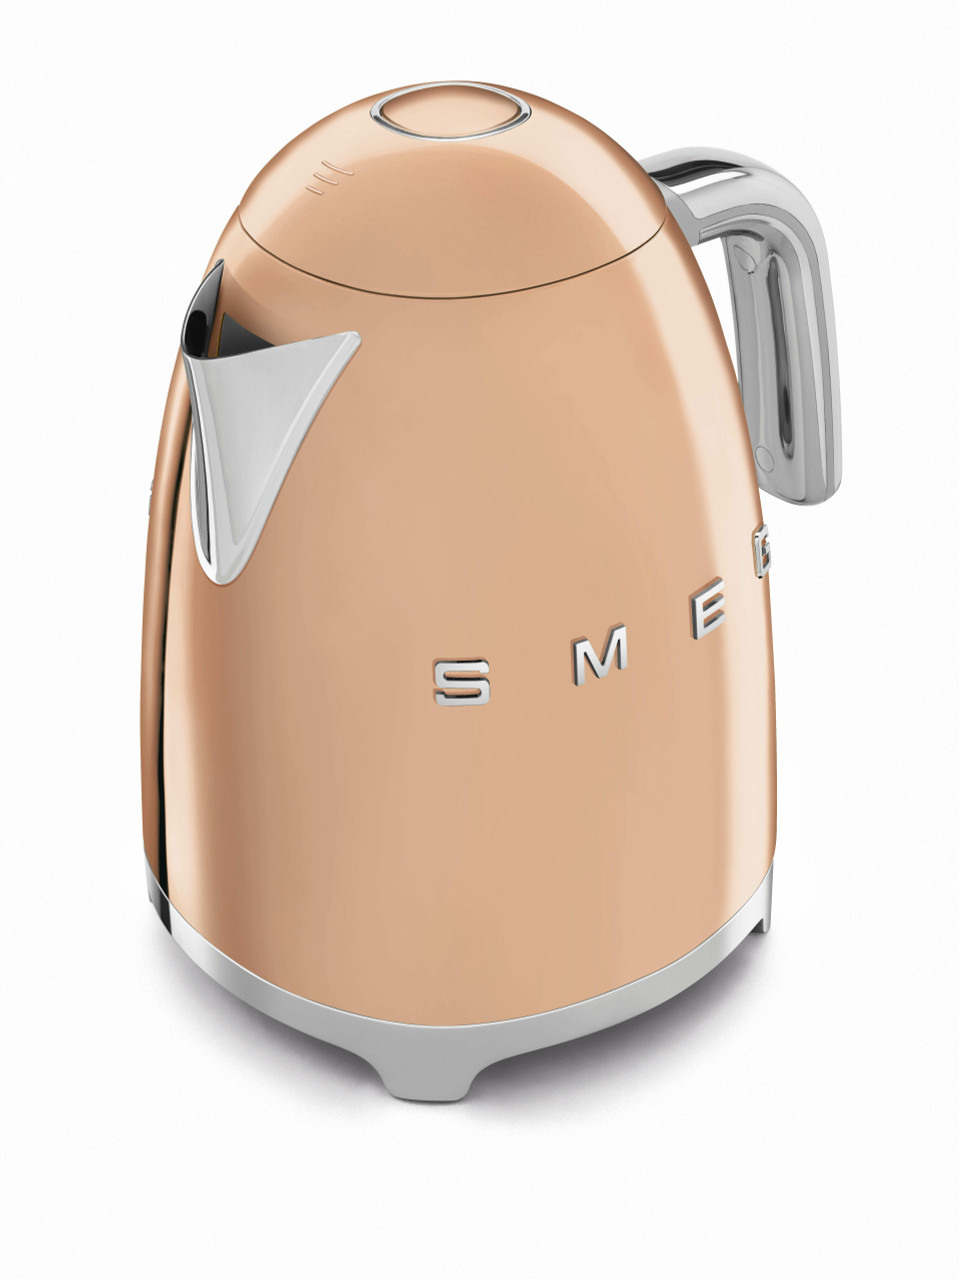 KLF03RGAU - 50's Retro Style Aesthetic Kettle Variable Temp, ROSE GOLD